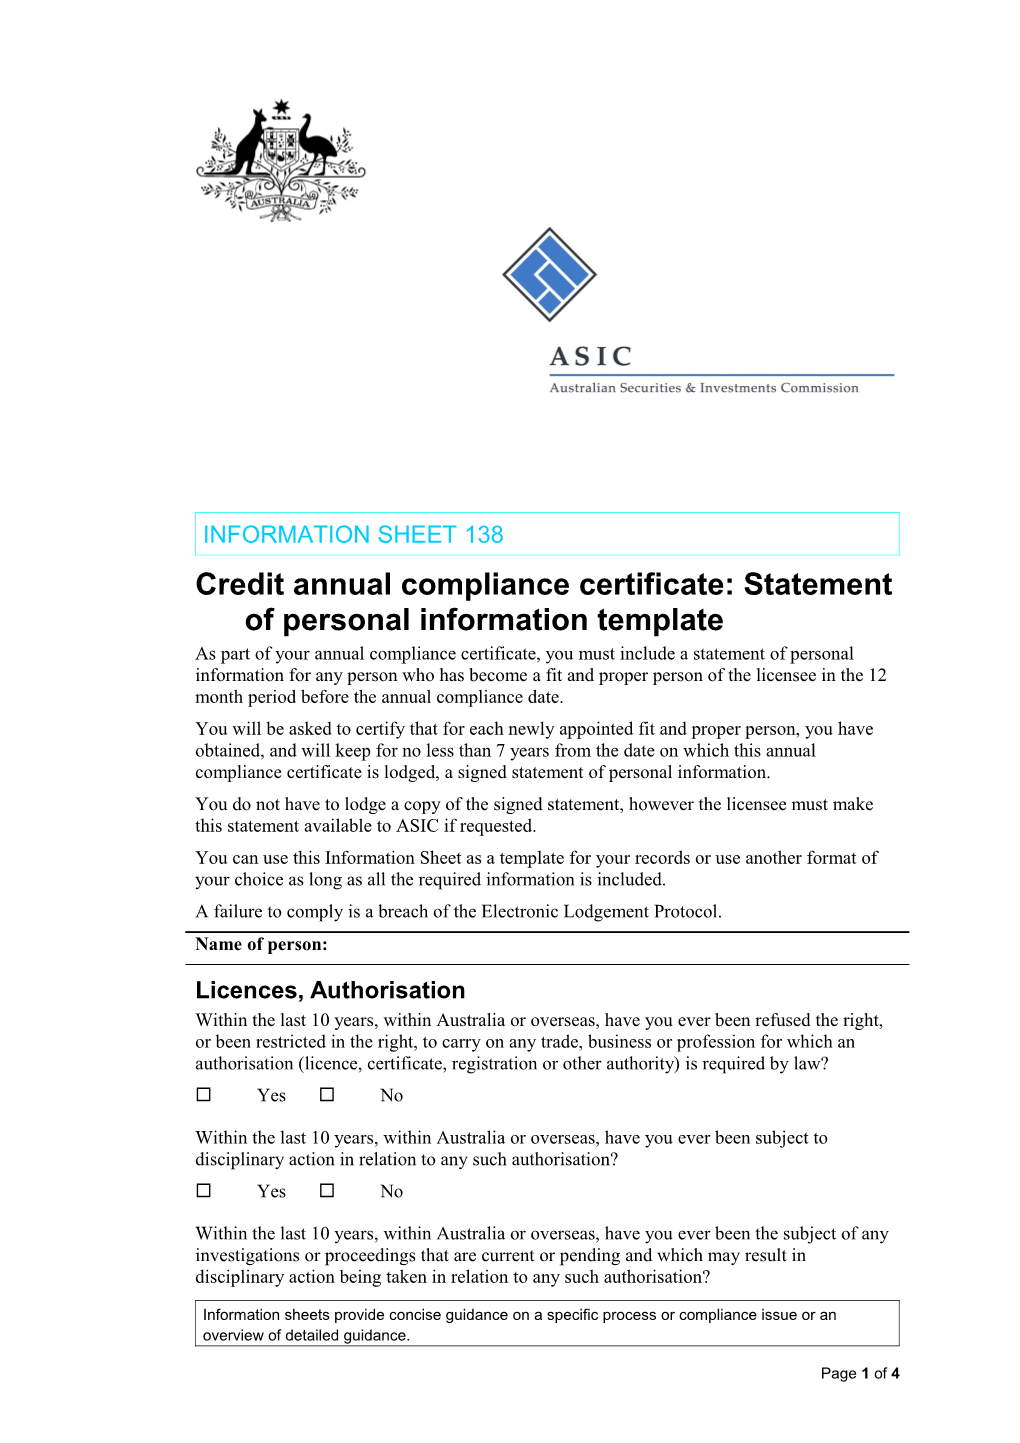 Credit Annual Compliance Certificate: Statement of Personal Information TEMPLATE